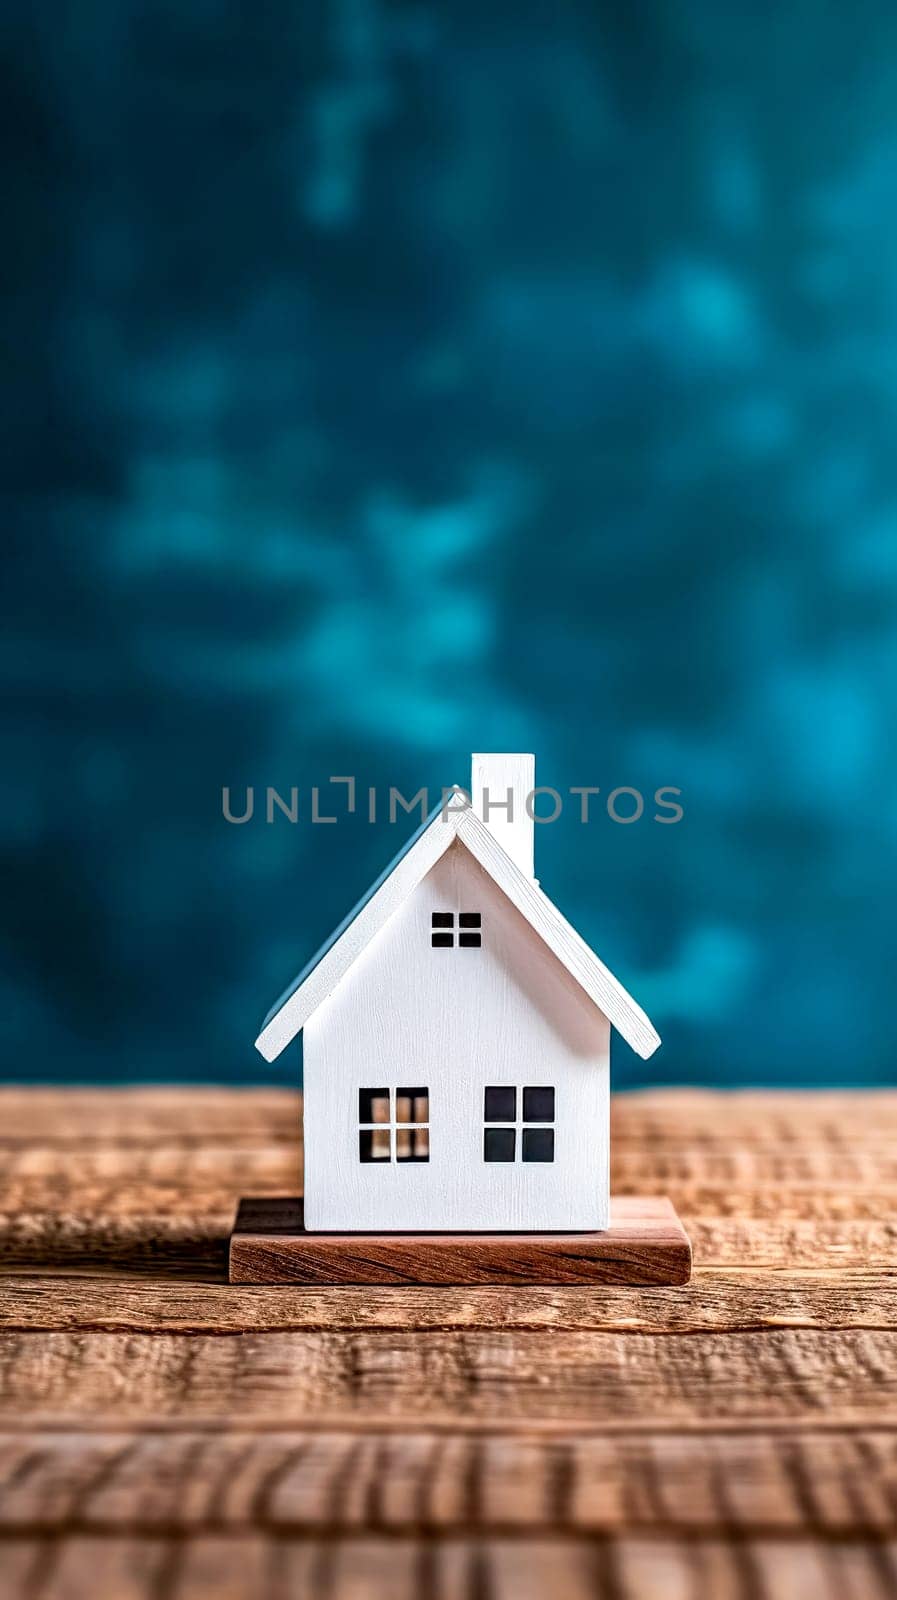 real estate market, the dream of owning your own home, miniature model of a white house with a simple, classic design, placed on a wooden surface by Edophoto